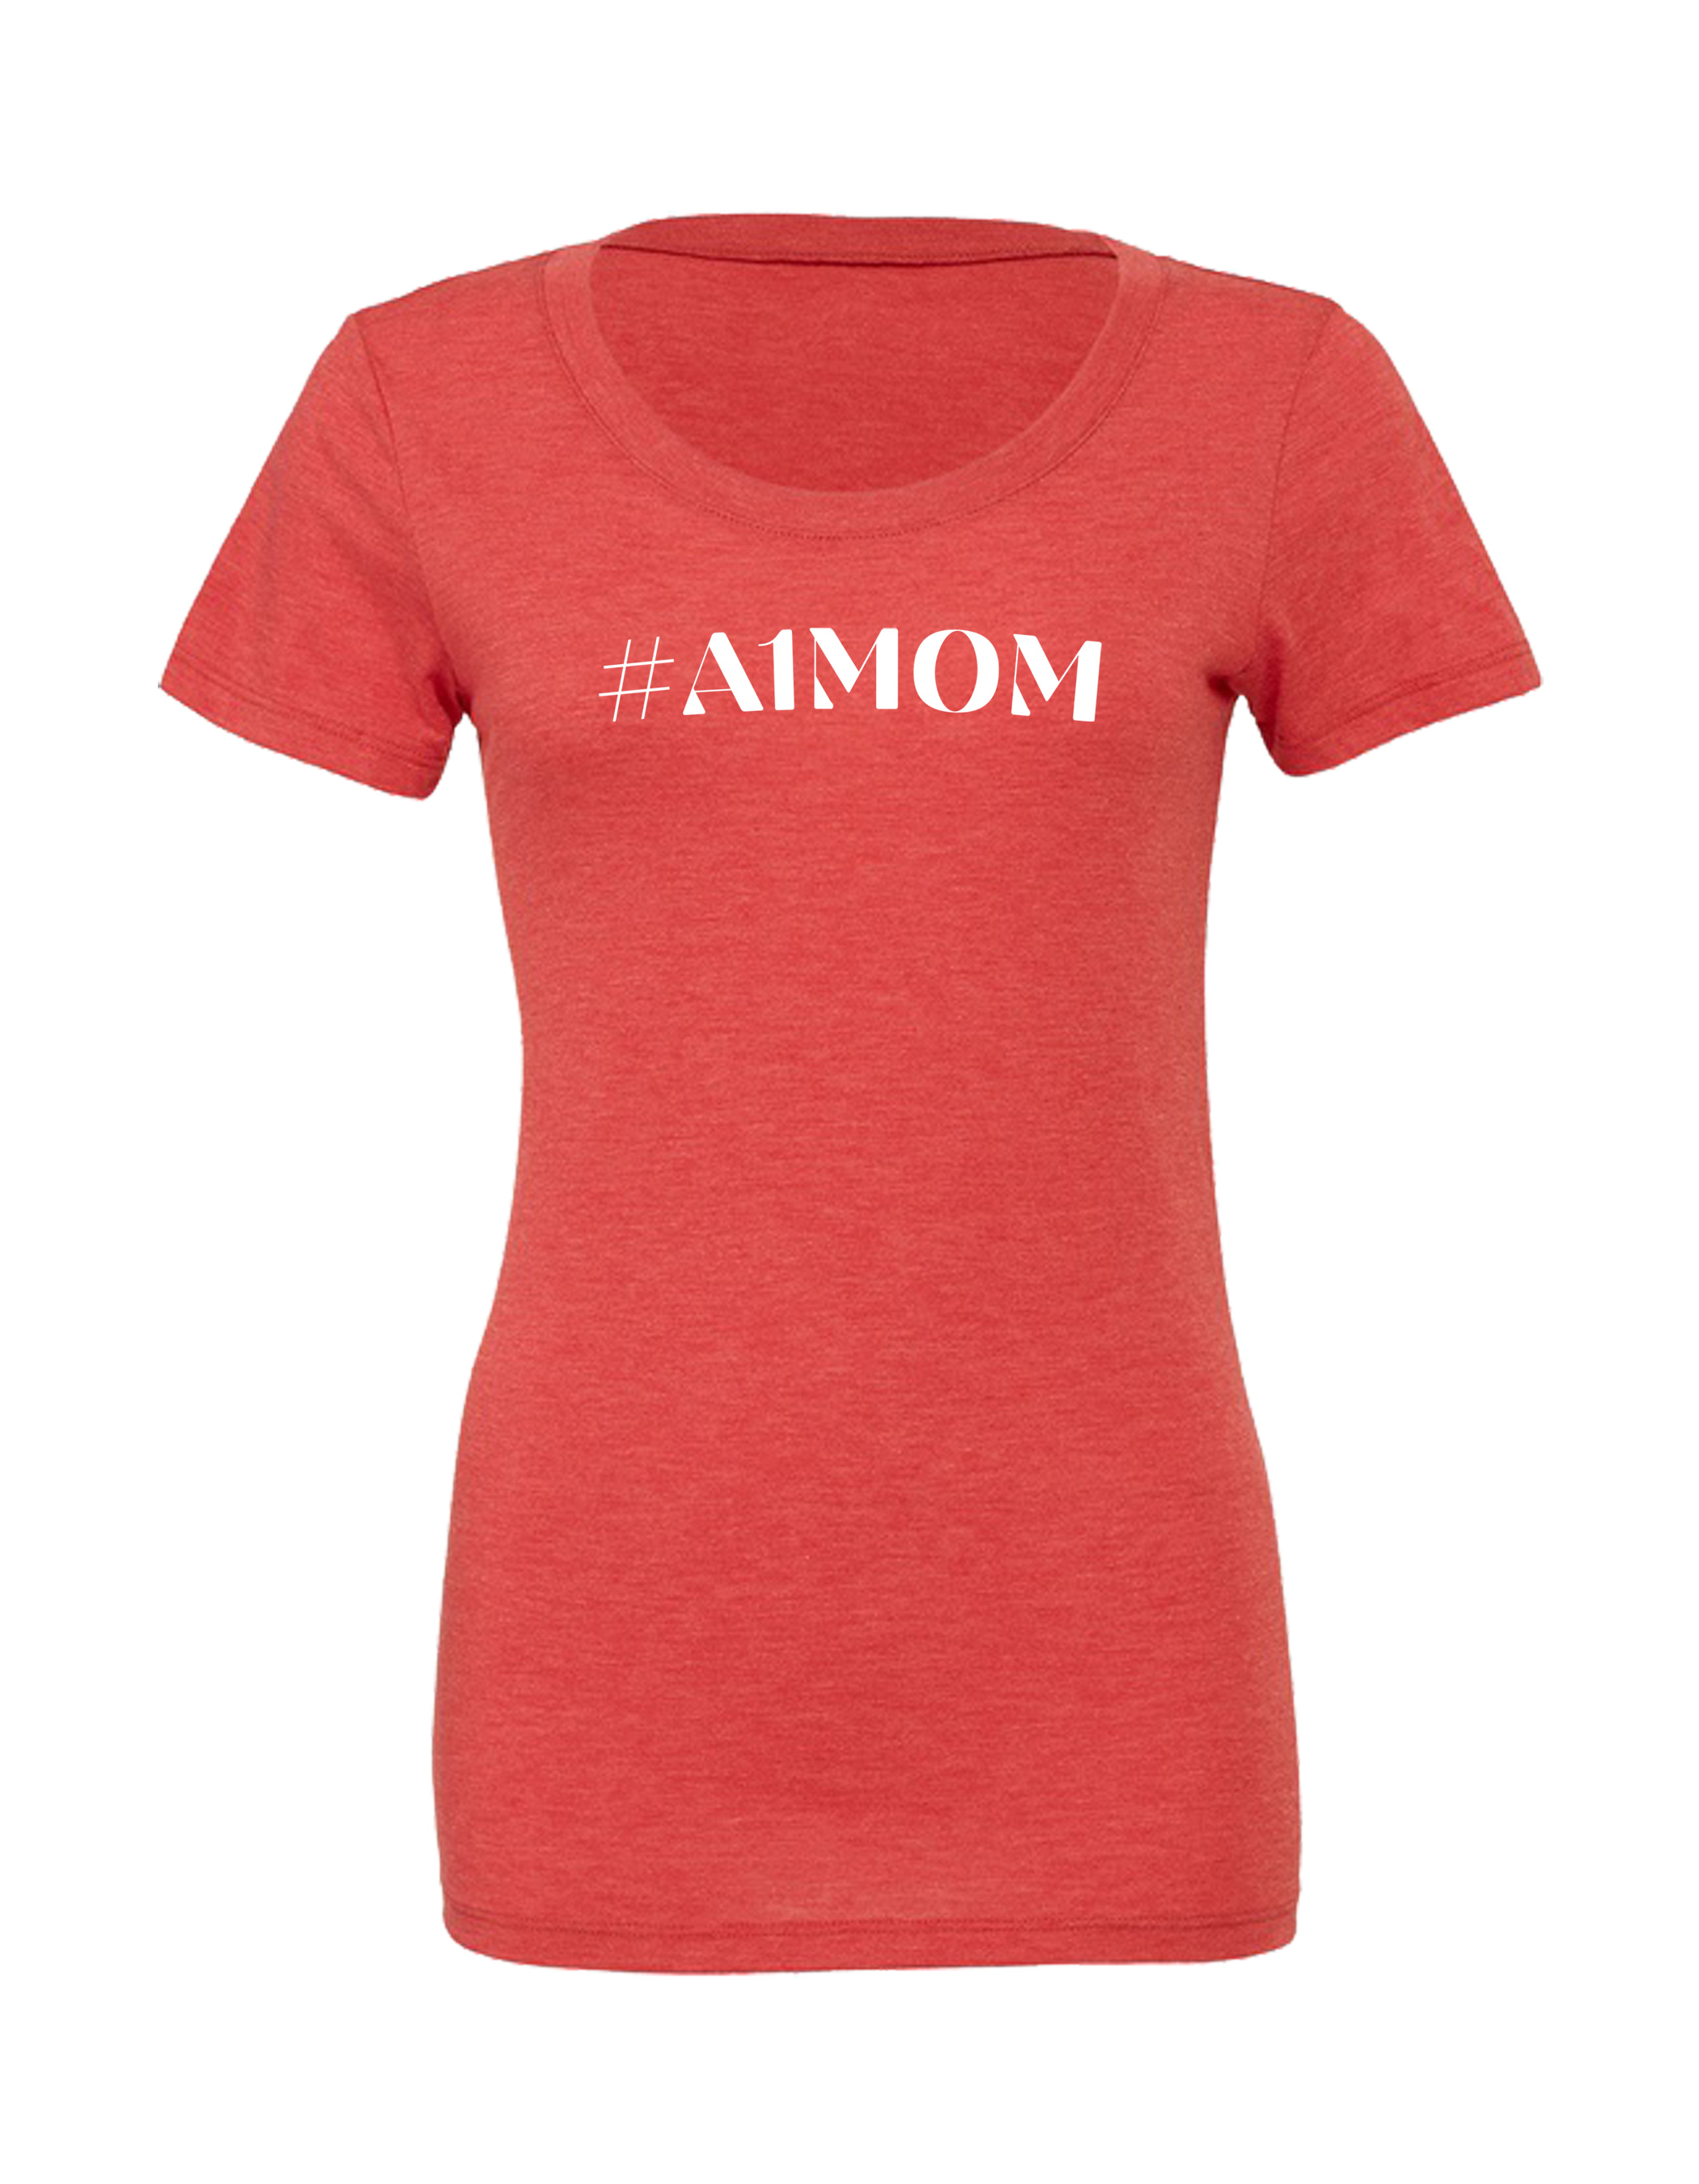 #A1MOM - Red & White Tee